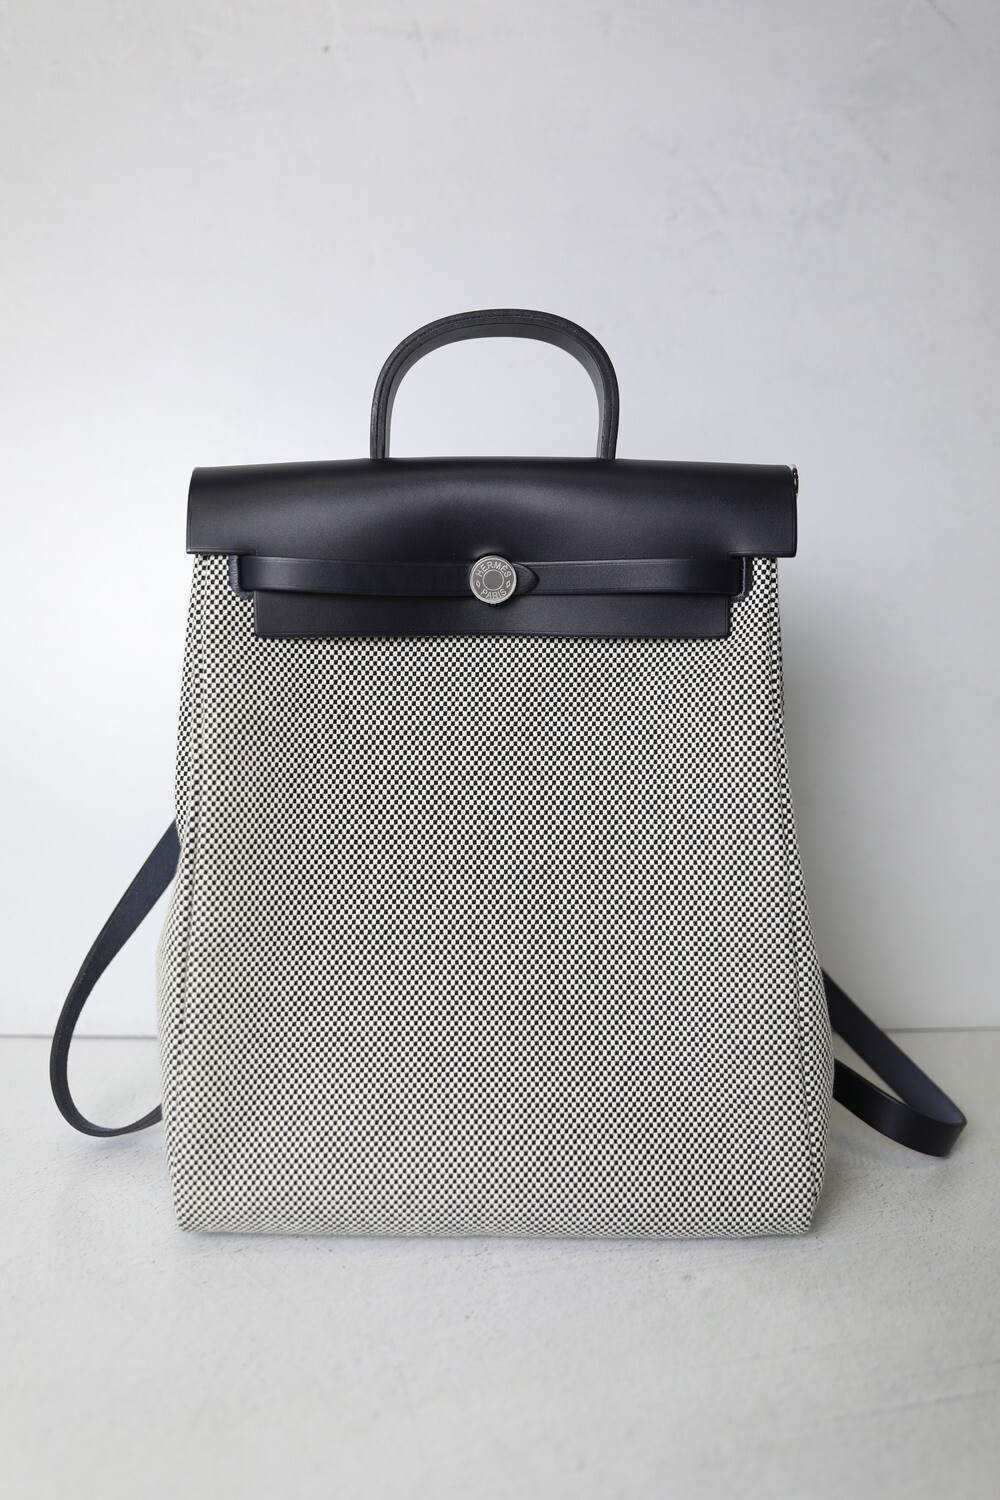 Hermes Herbag PM Backpack, Navy and White Toile, New in Box WA001